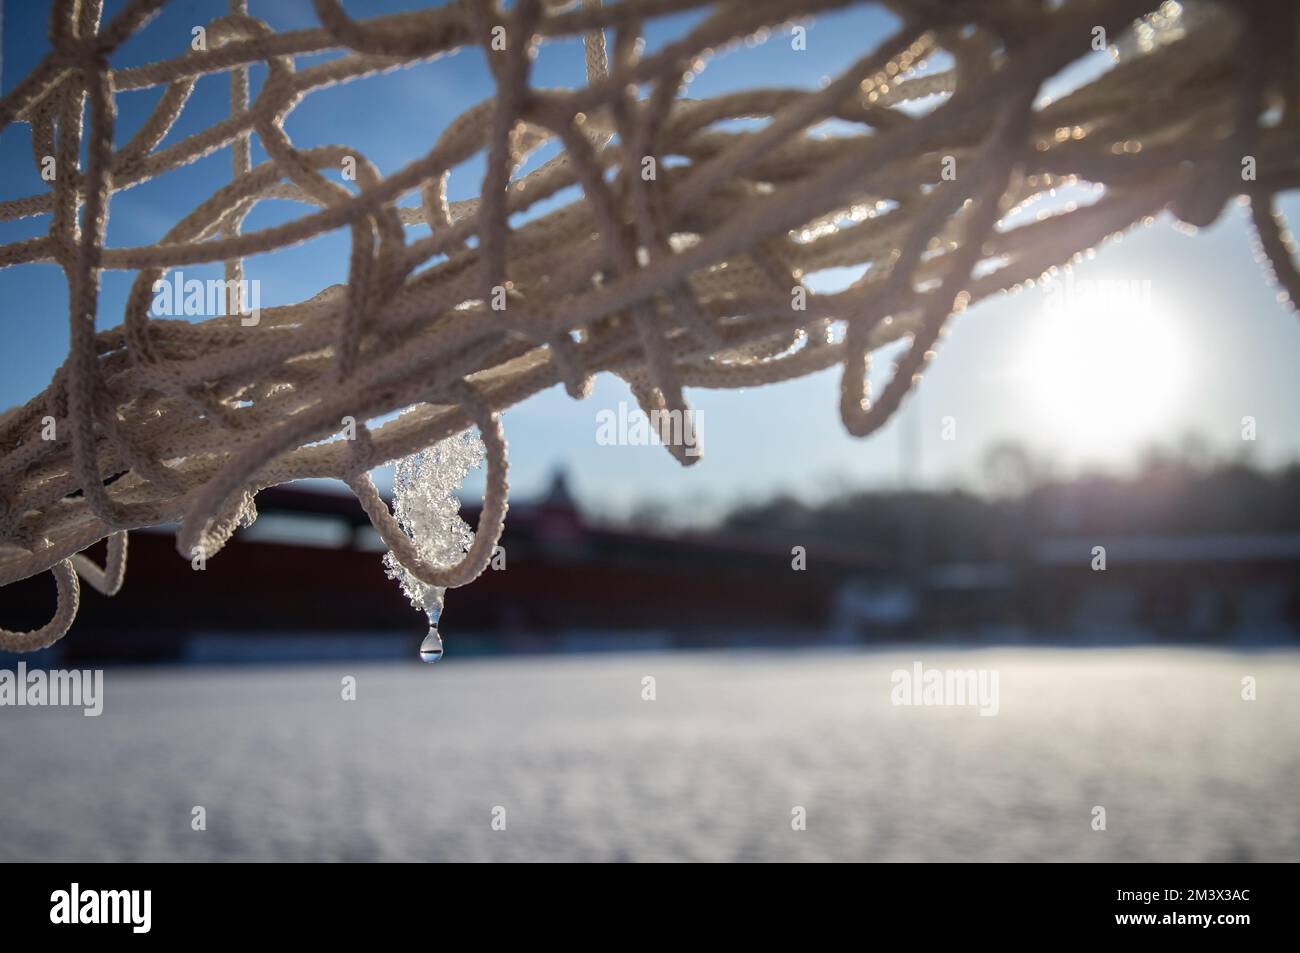 close up of melting ice on goal net on football pitch covered with snow. Stock Photo